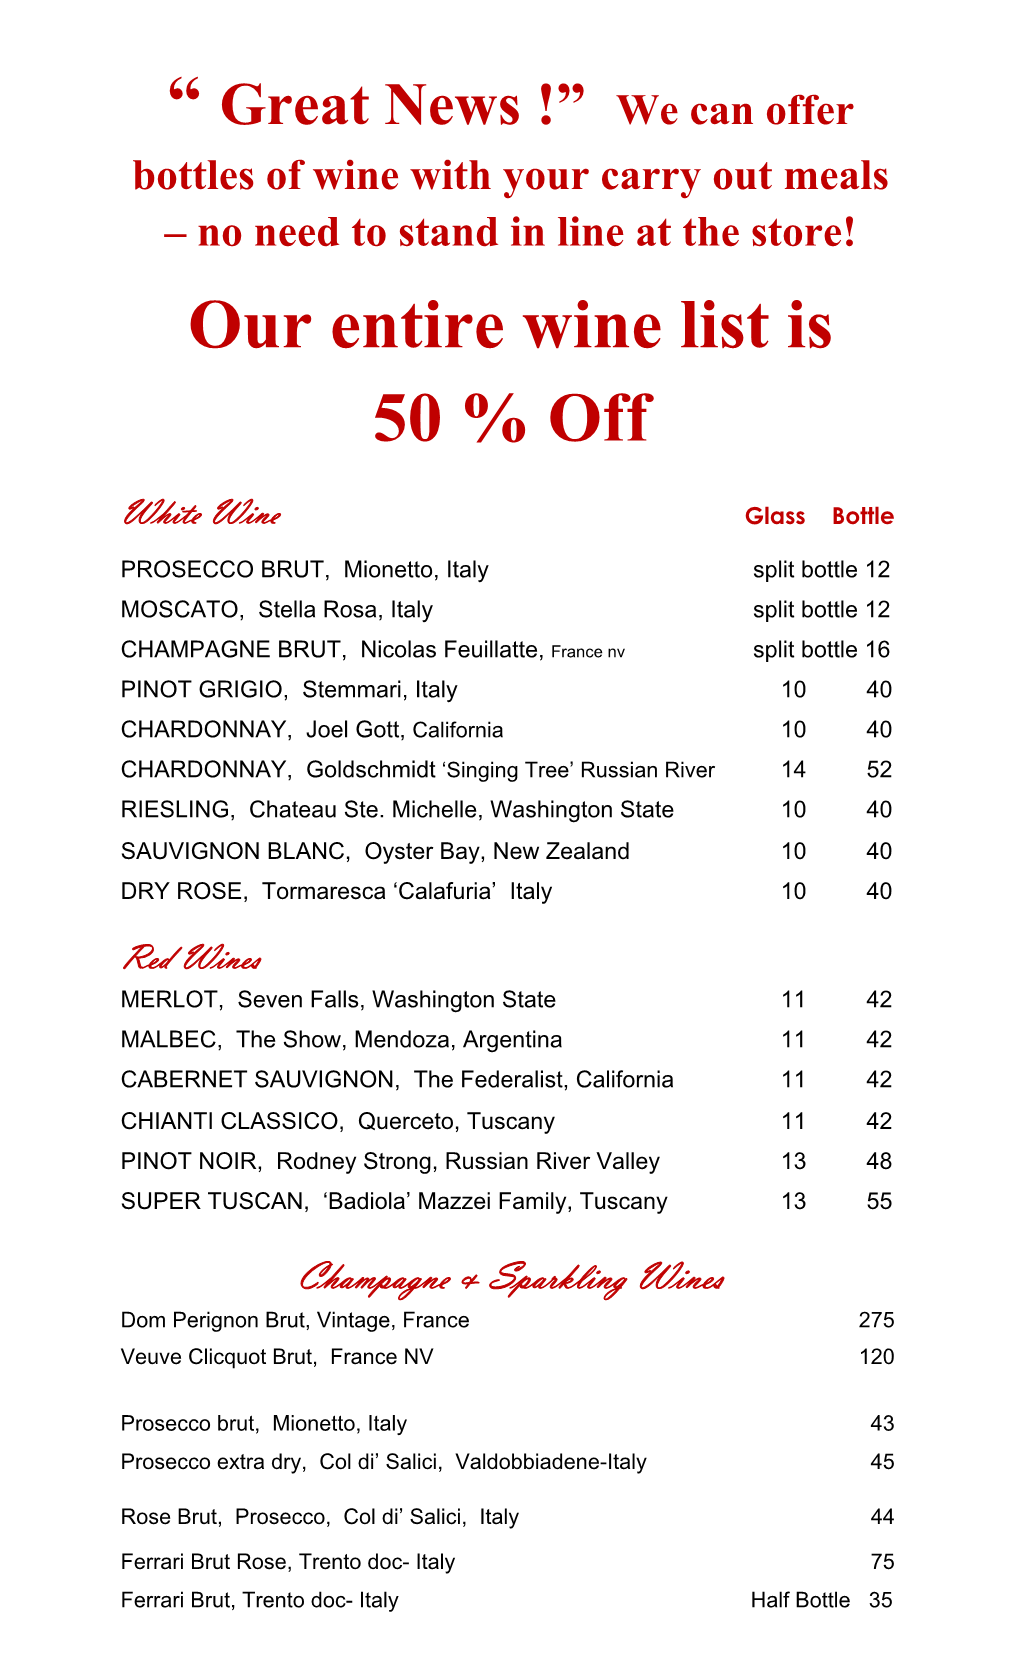 Our Entire Wine List Is 50 % Off